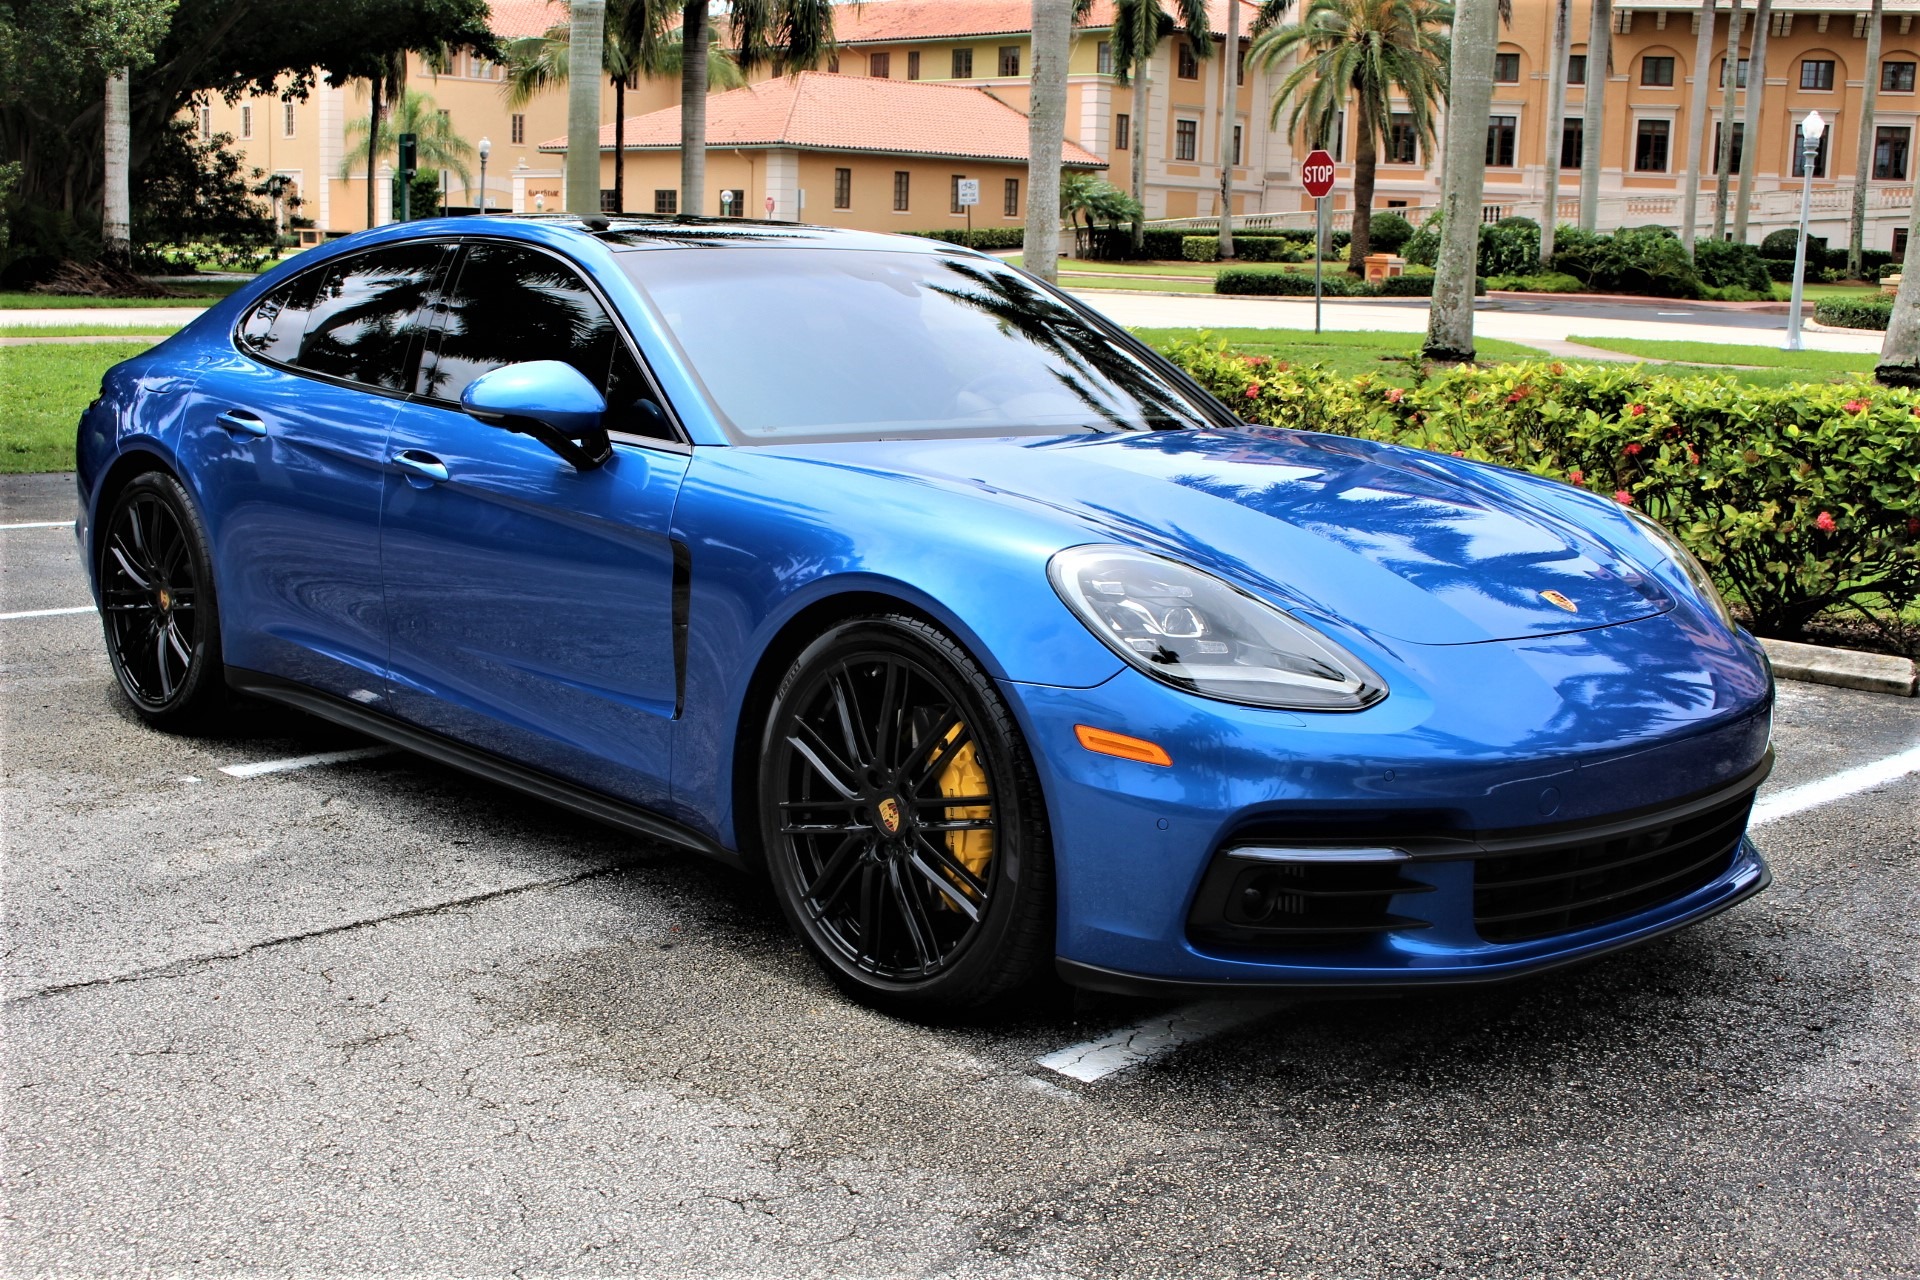 Used 2017 Porsche Panamera 4S for sale Sold at The Gables Sports Cars in Miami FL 33146 3